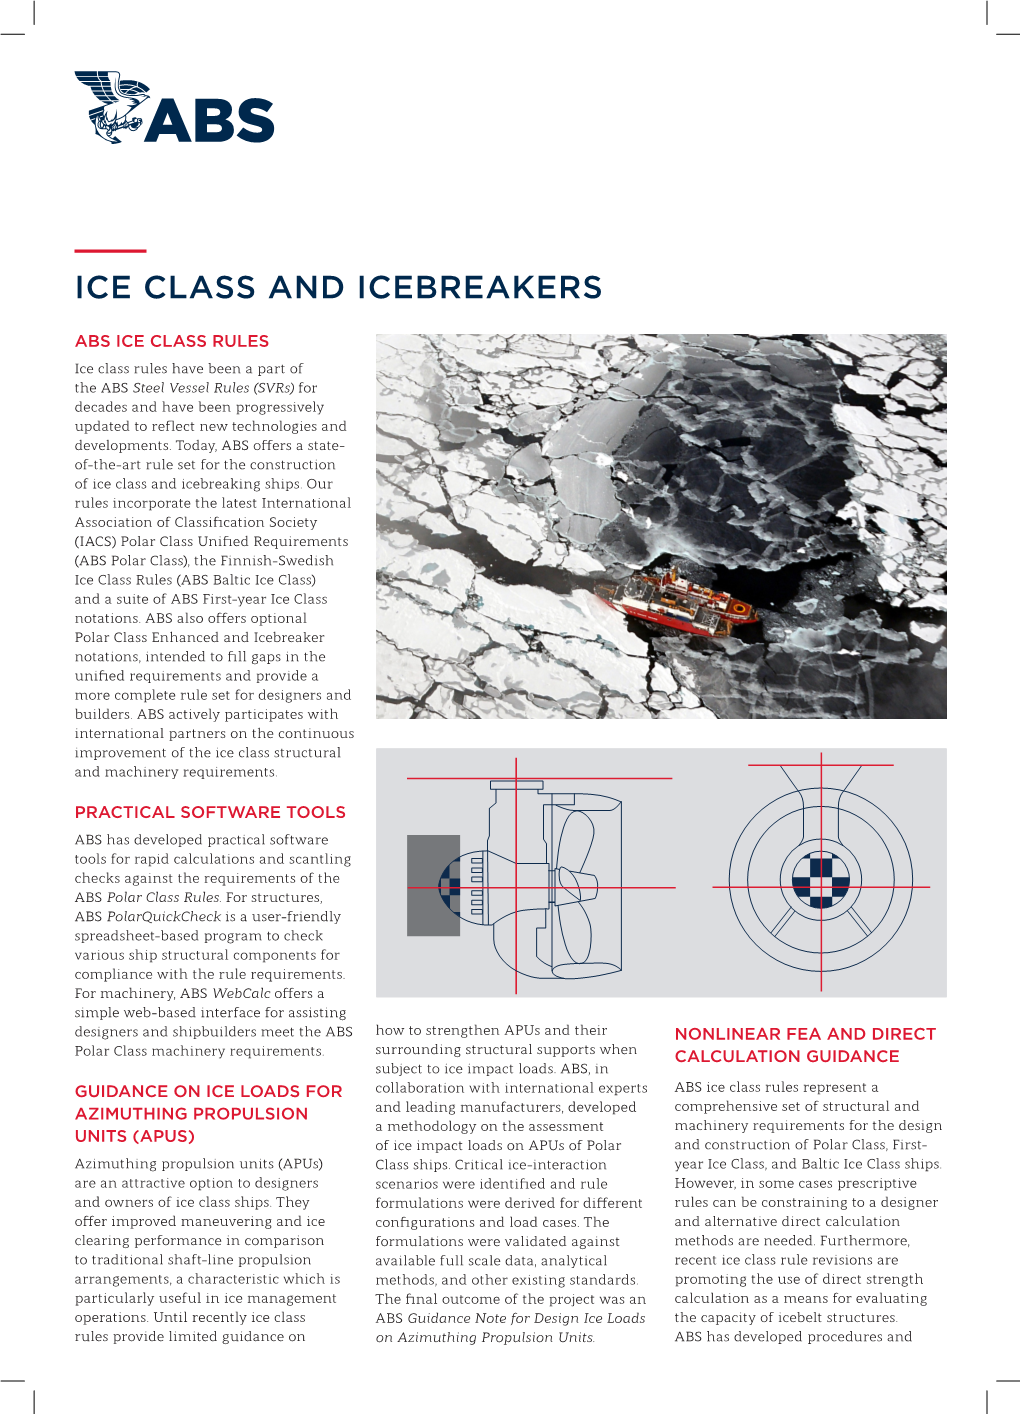 Ice Class and Icebreakers